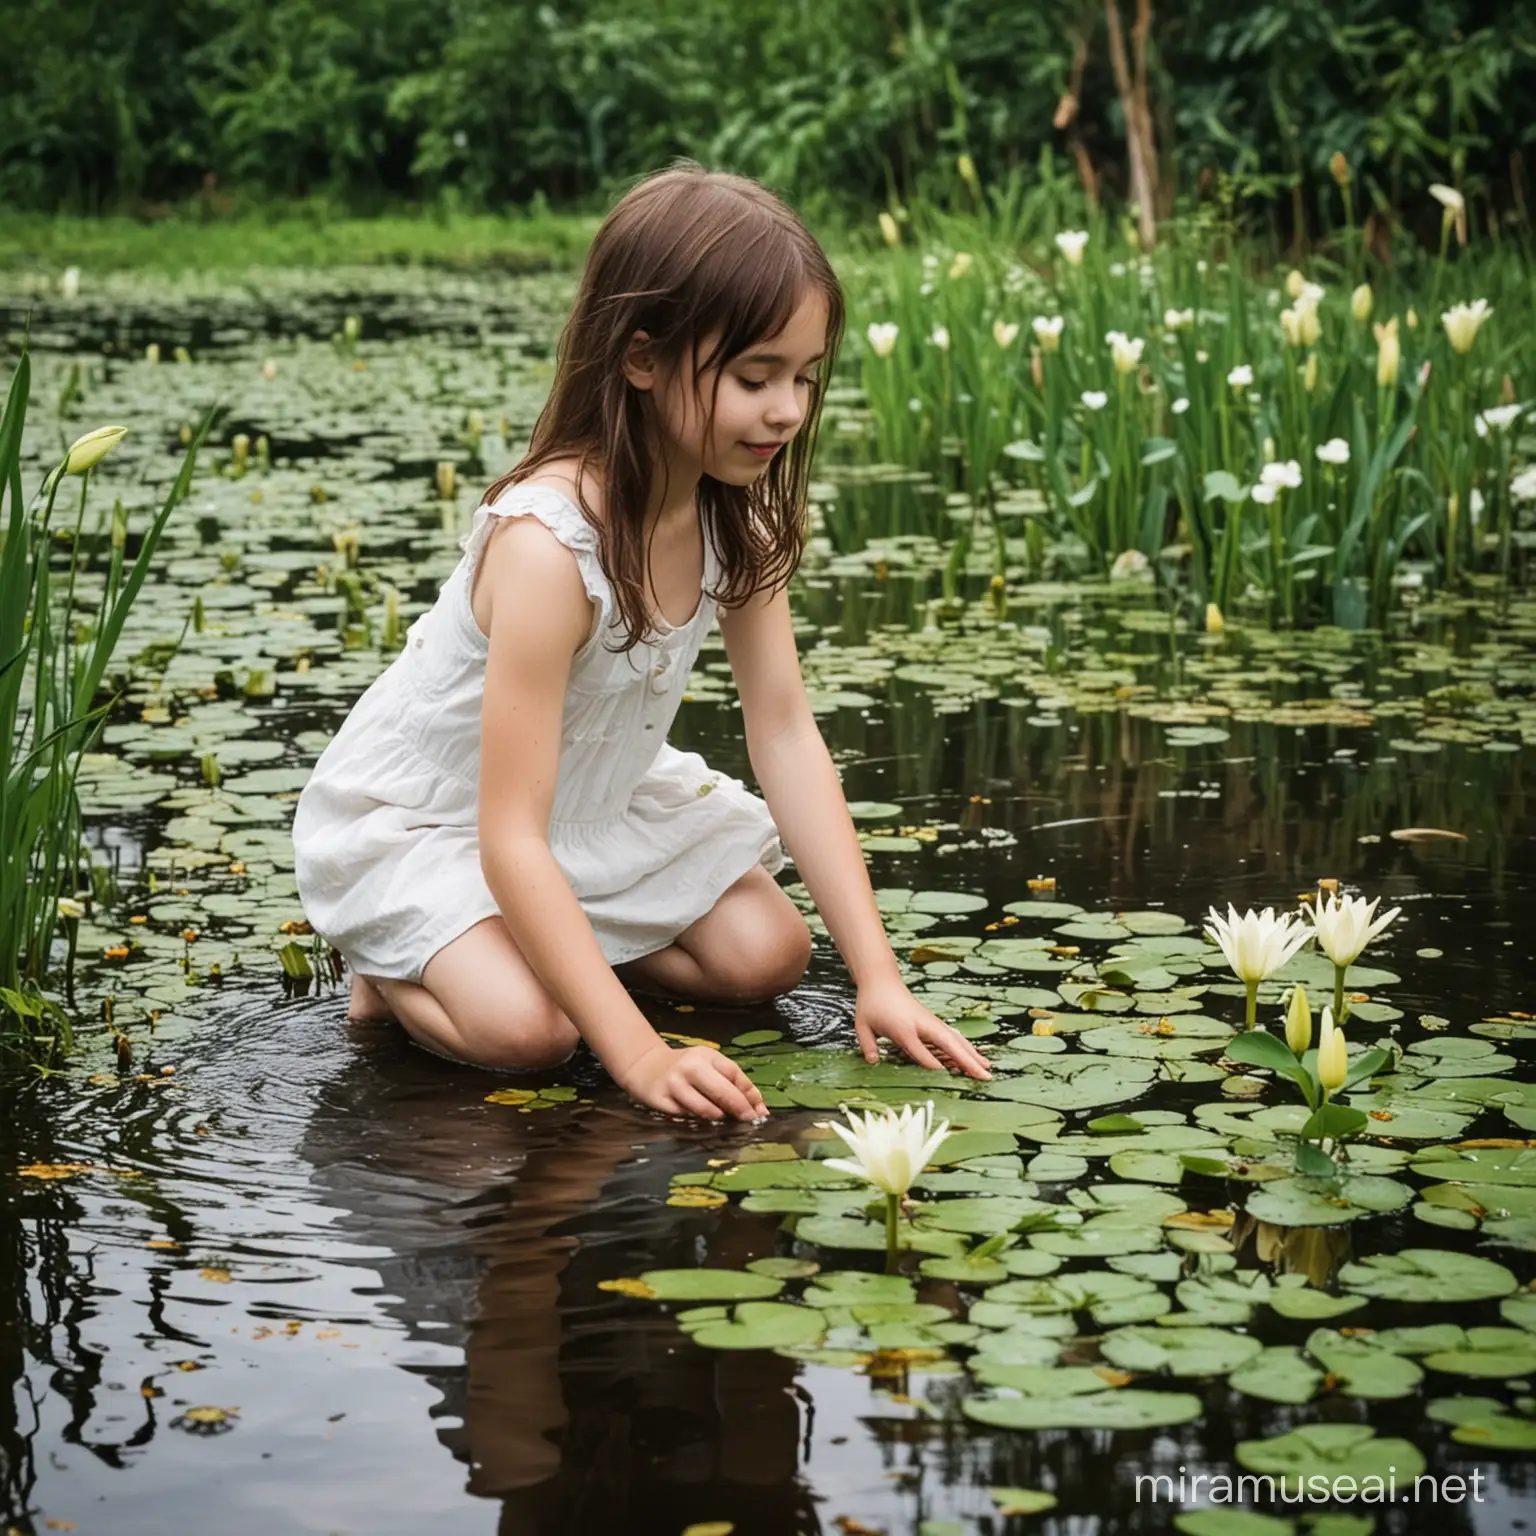 Girl Enjoying Playtime Amidst Lilies and Serene Waterscape